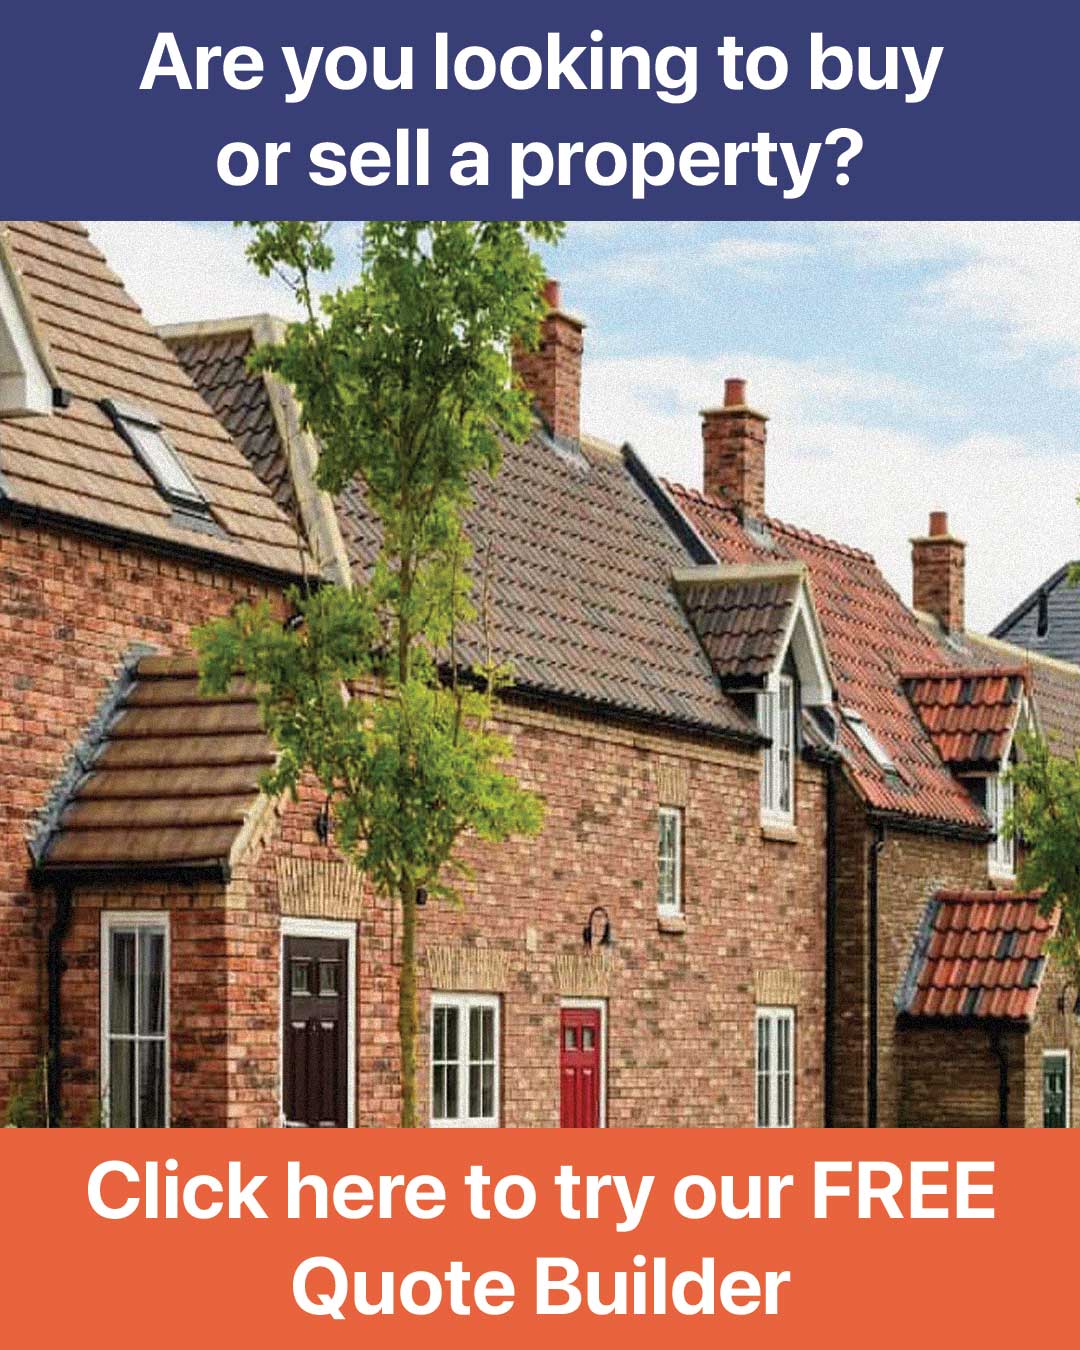 Conveyancing Solicitors in Oldham, Manchester and Todmorden - Free Conveyancing Quote